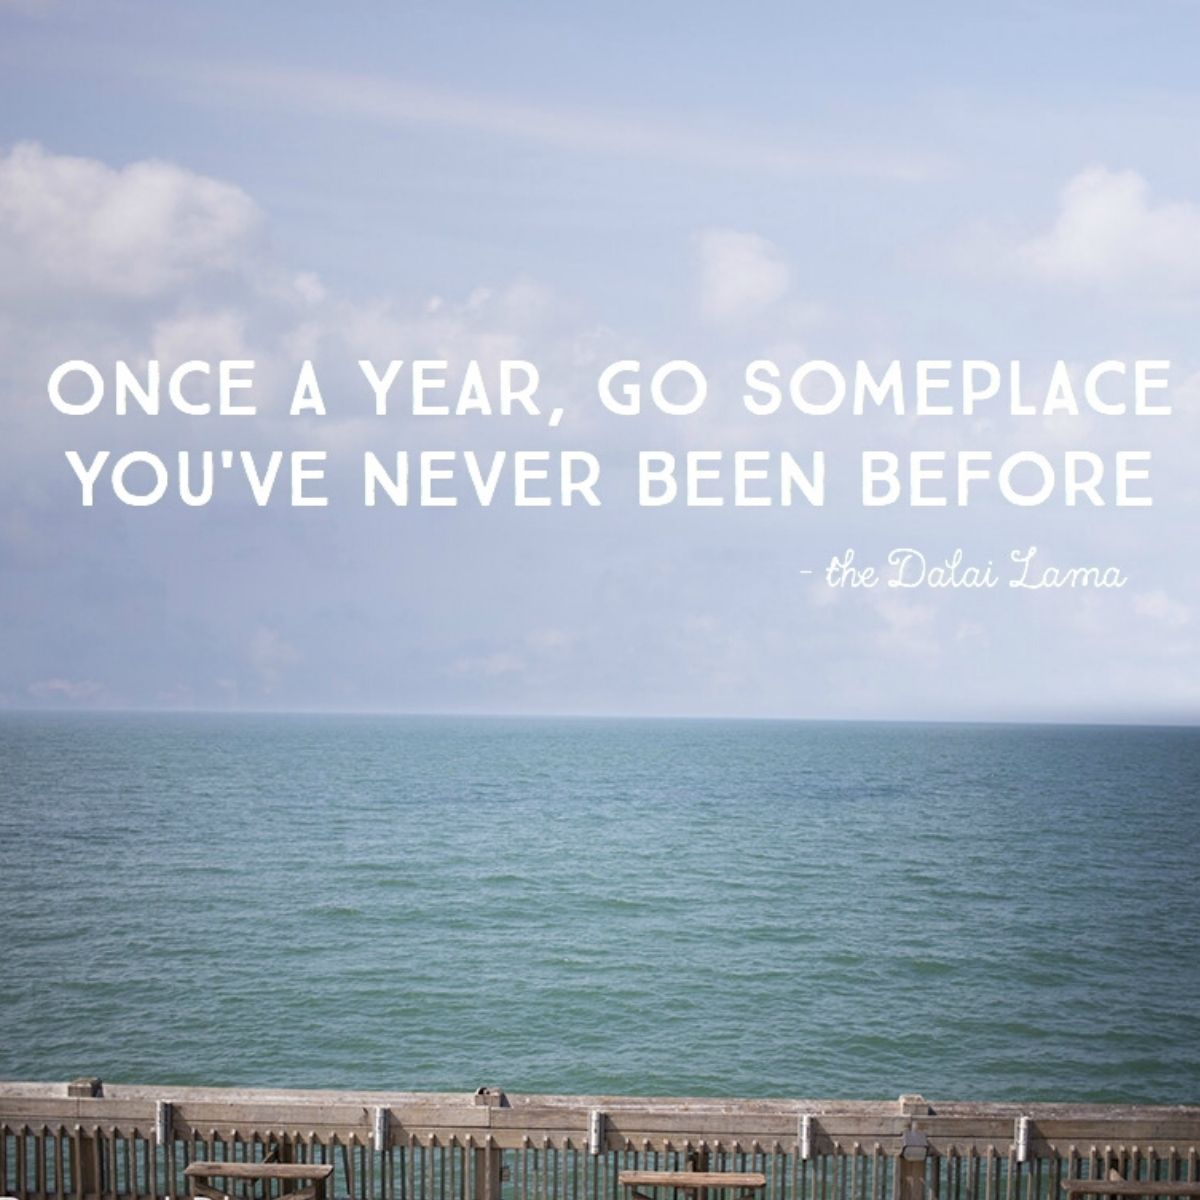 Quote says: Once a year, go someplace you've never been.